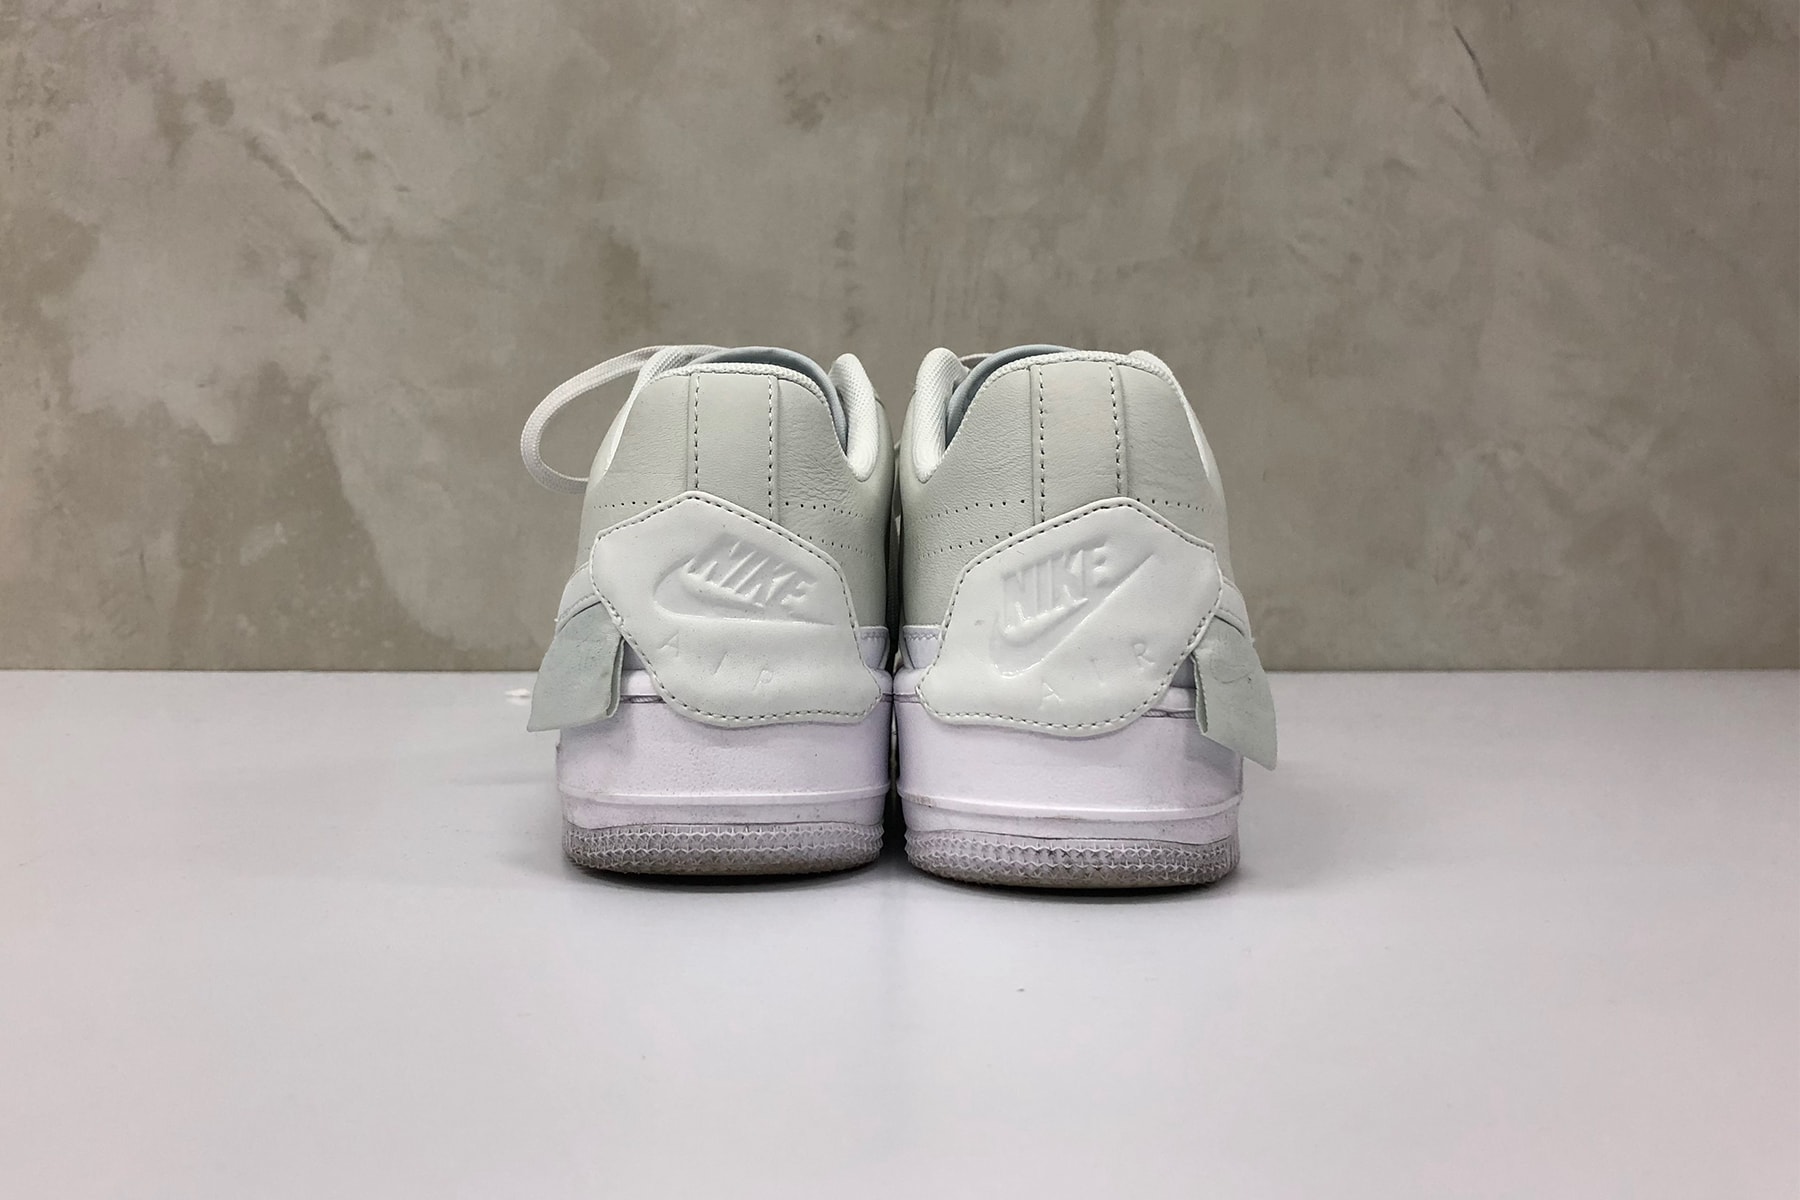 hypebaekicks review nike air force 1 jester xx the 1 reimagined pack back view heel